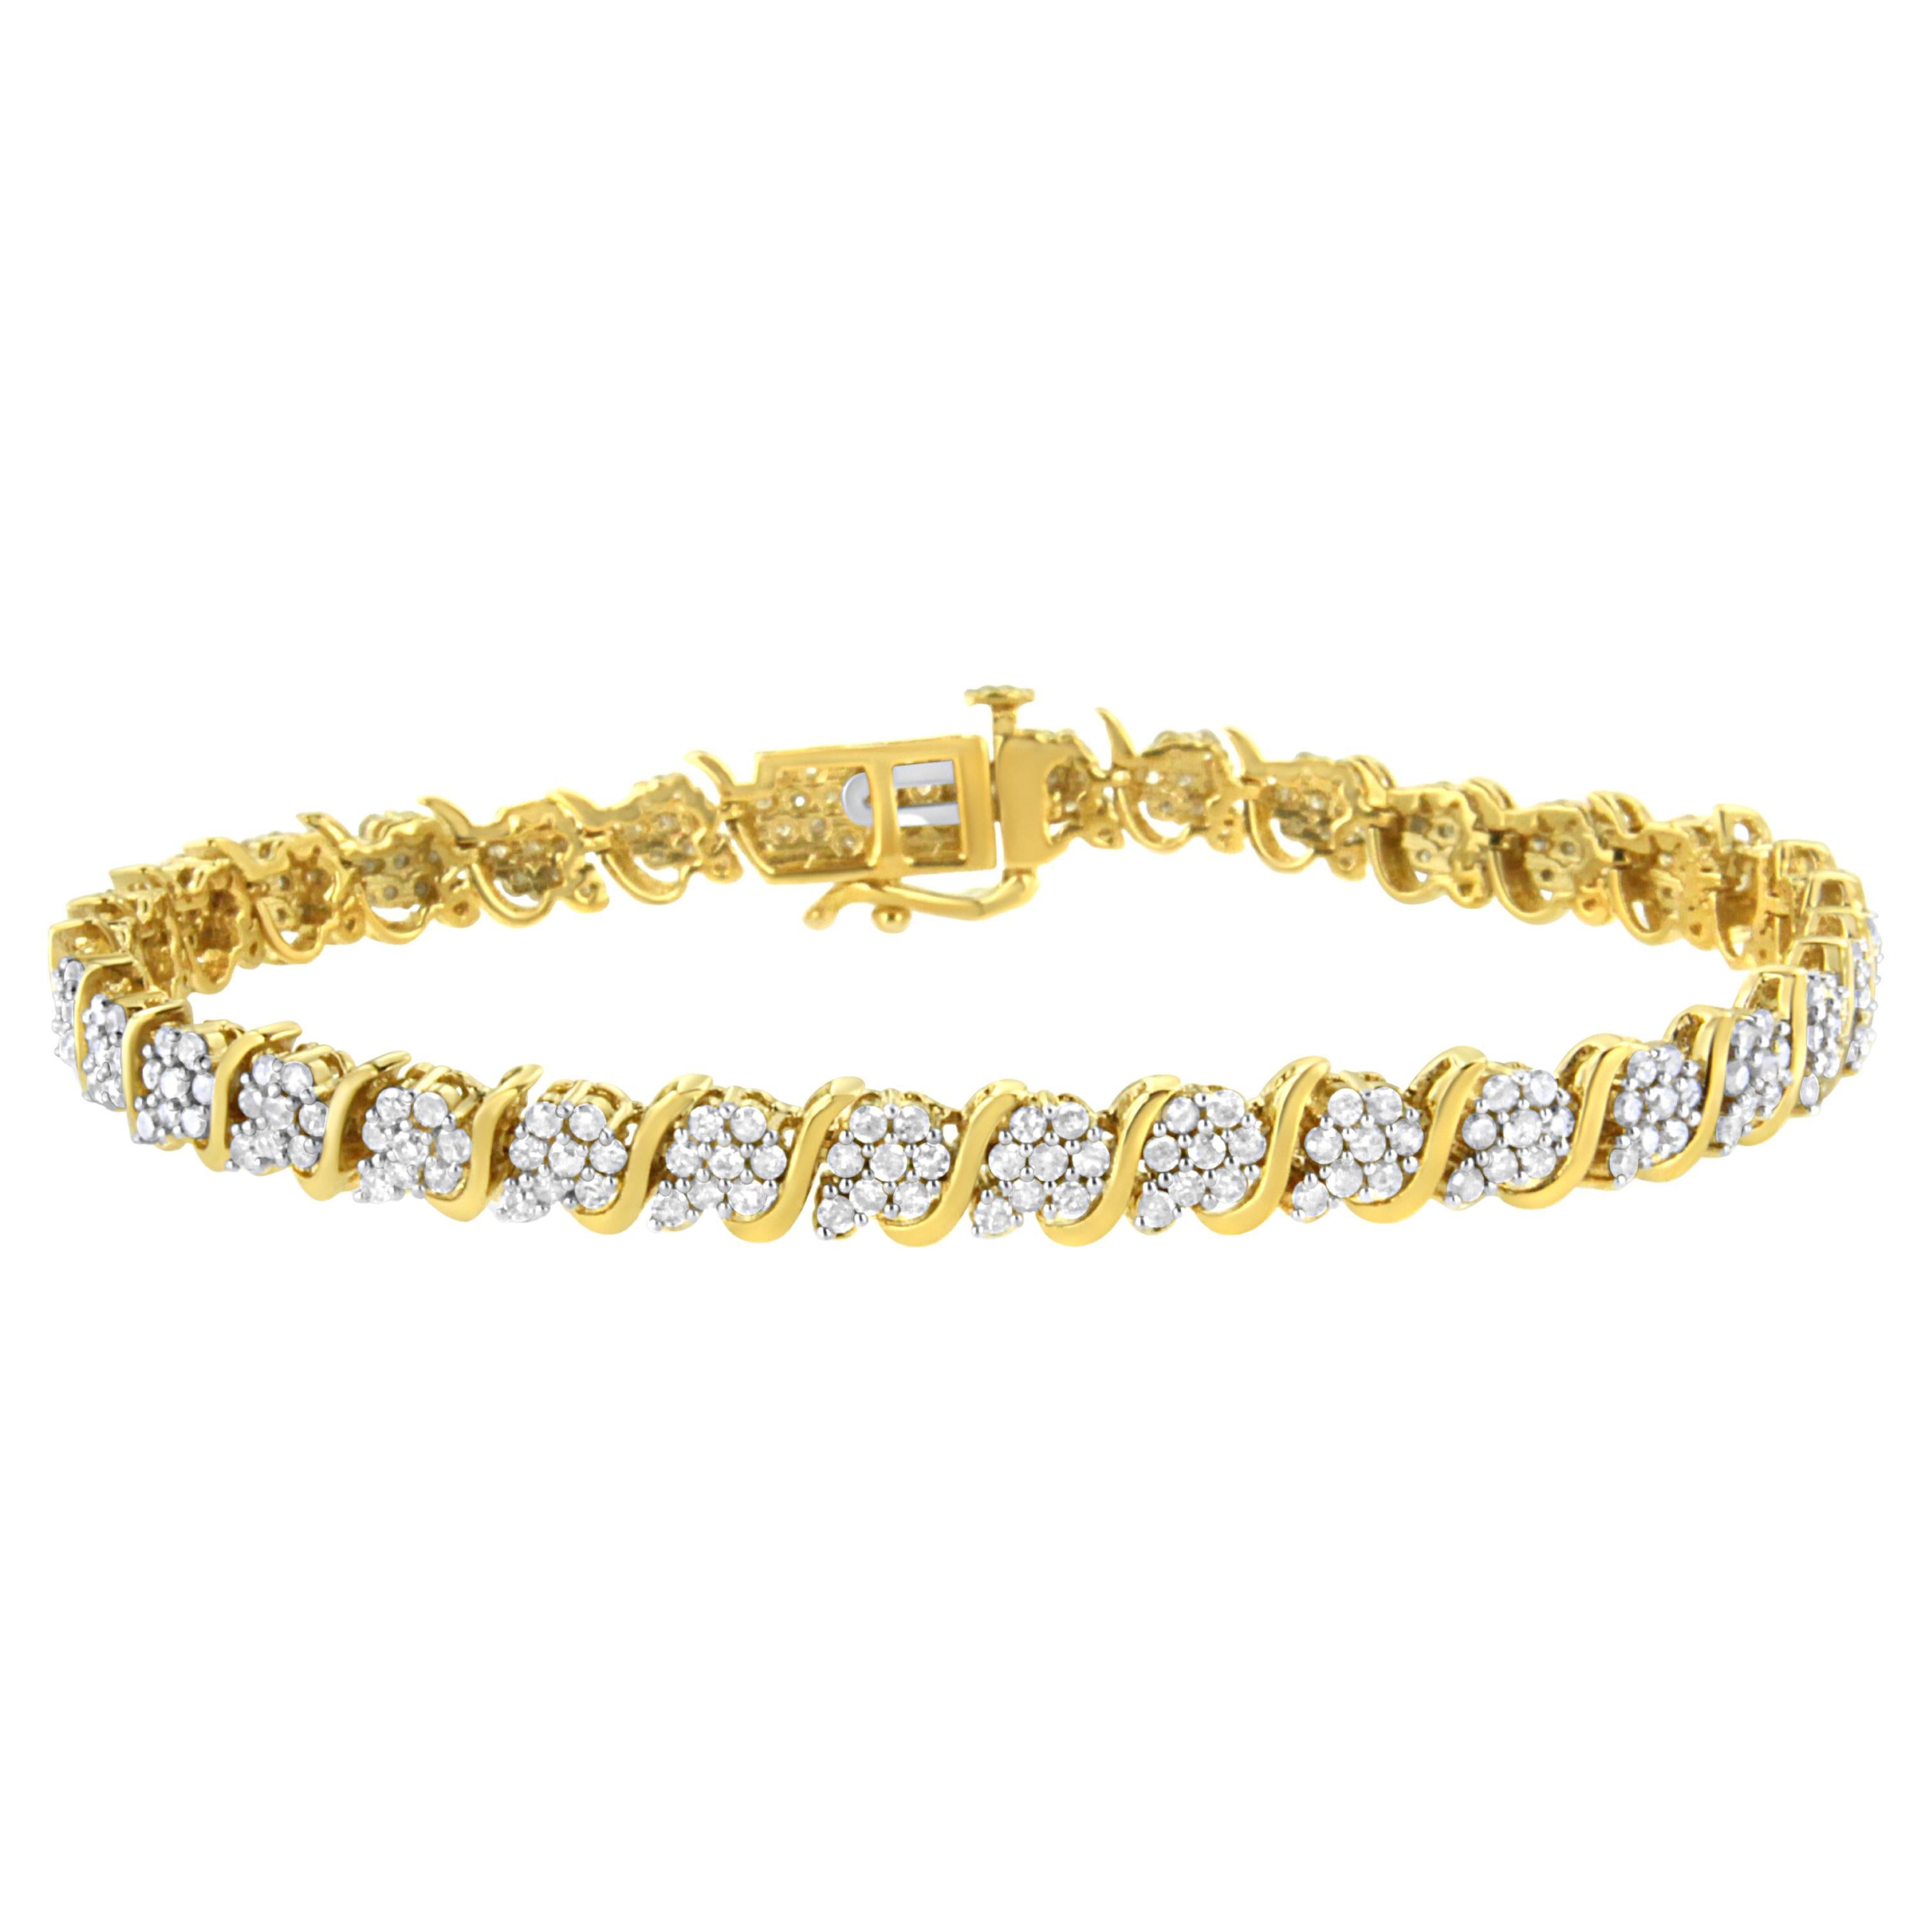 Yellow Gold Plated Sterling Silver 3.0 Carat Diamond "S" Link Tennis Bracelet For Sale